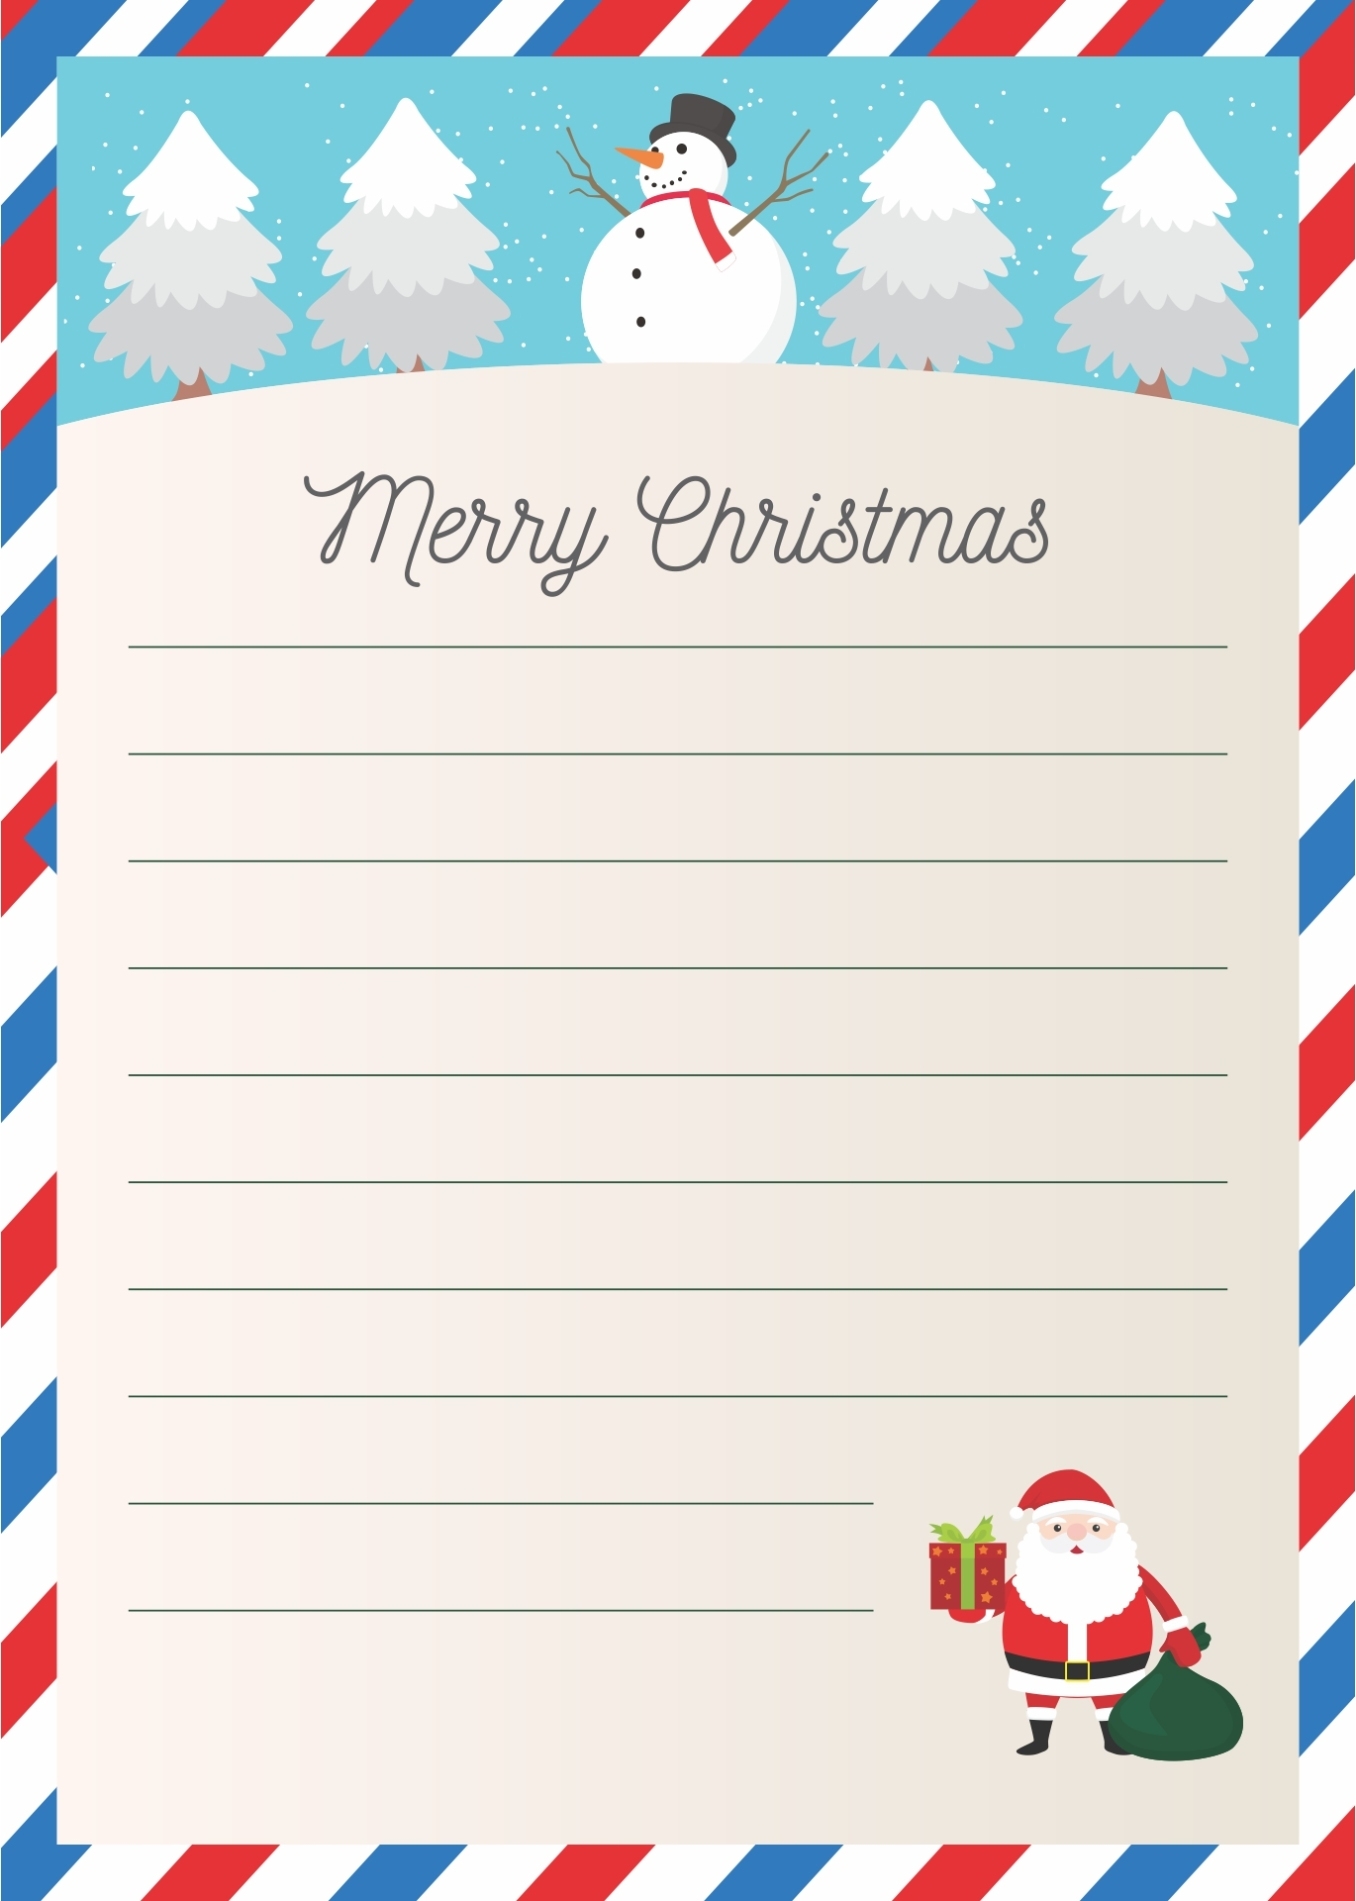 Christmas Letter Template Word – Aletters.one Pertaining To Christmas Letter Templates Microsoft Word